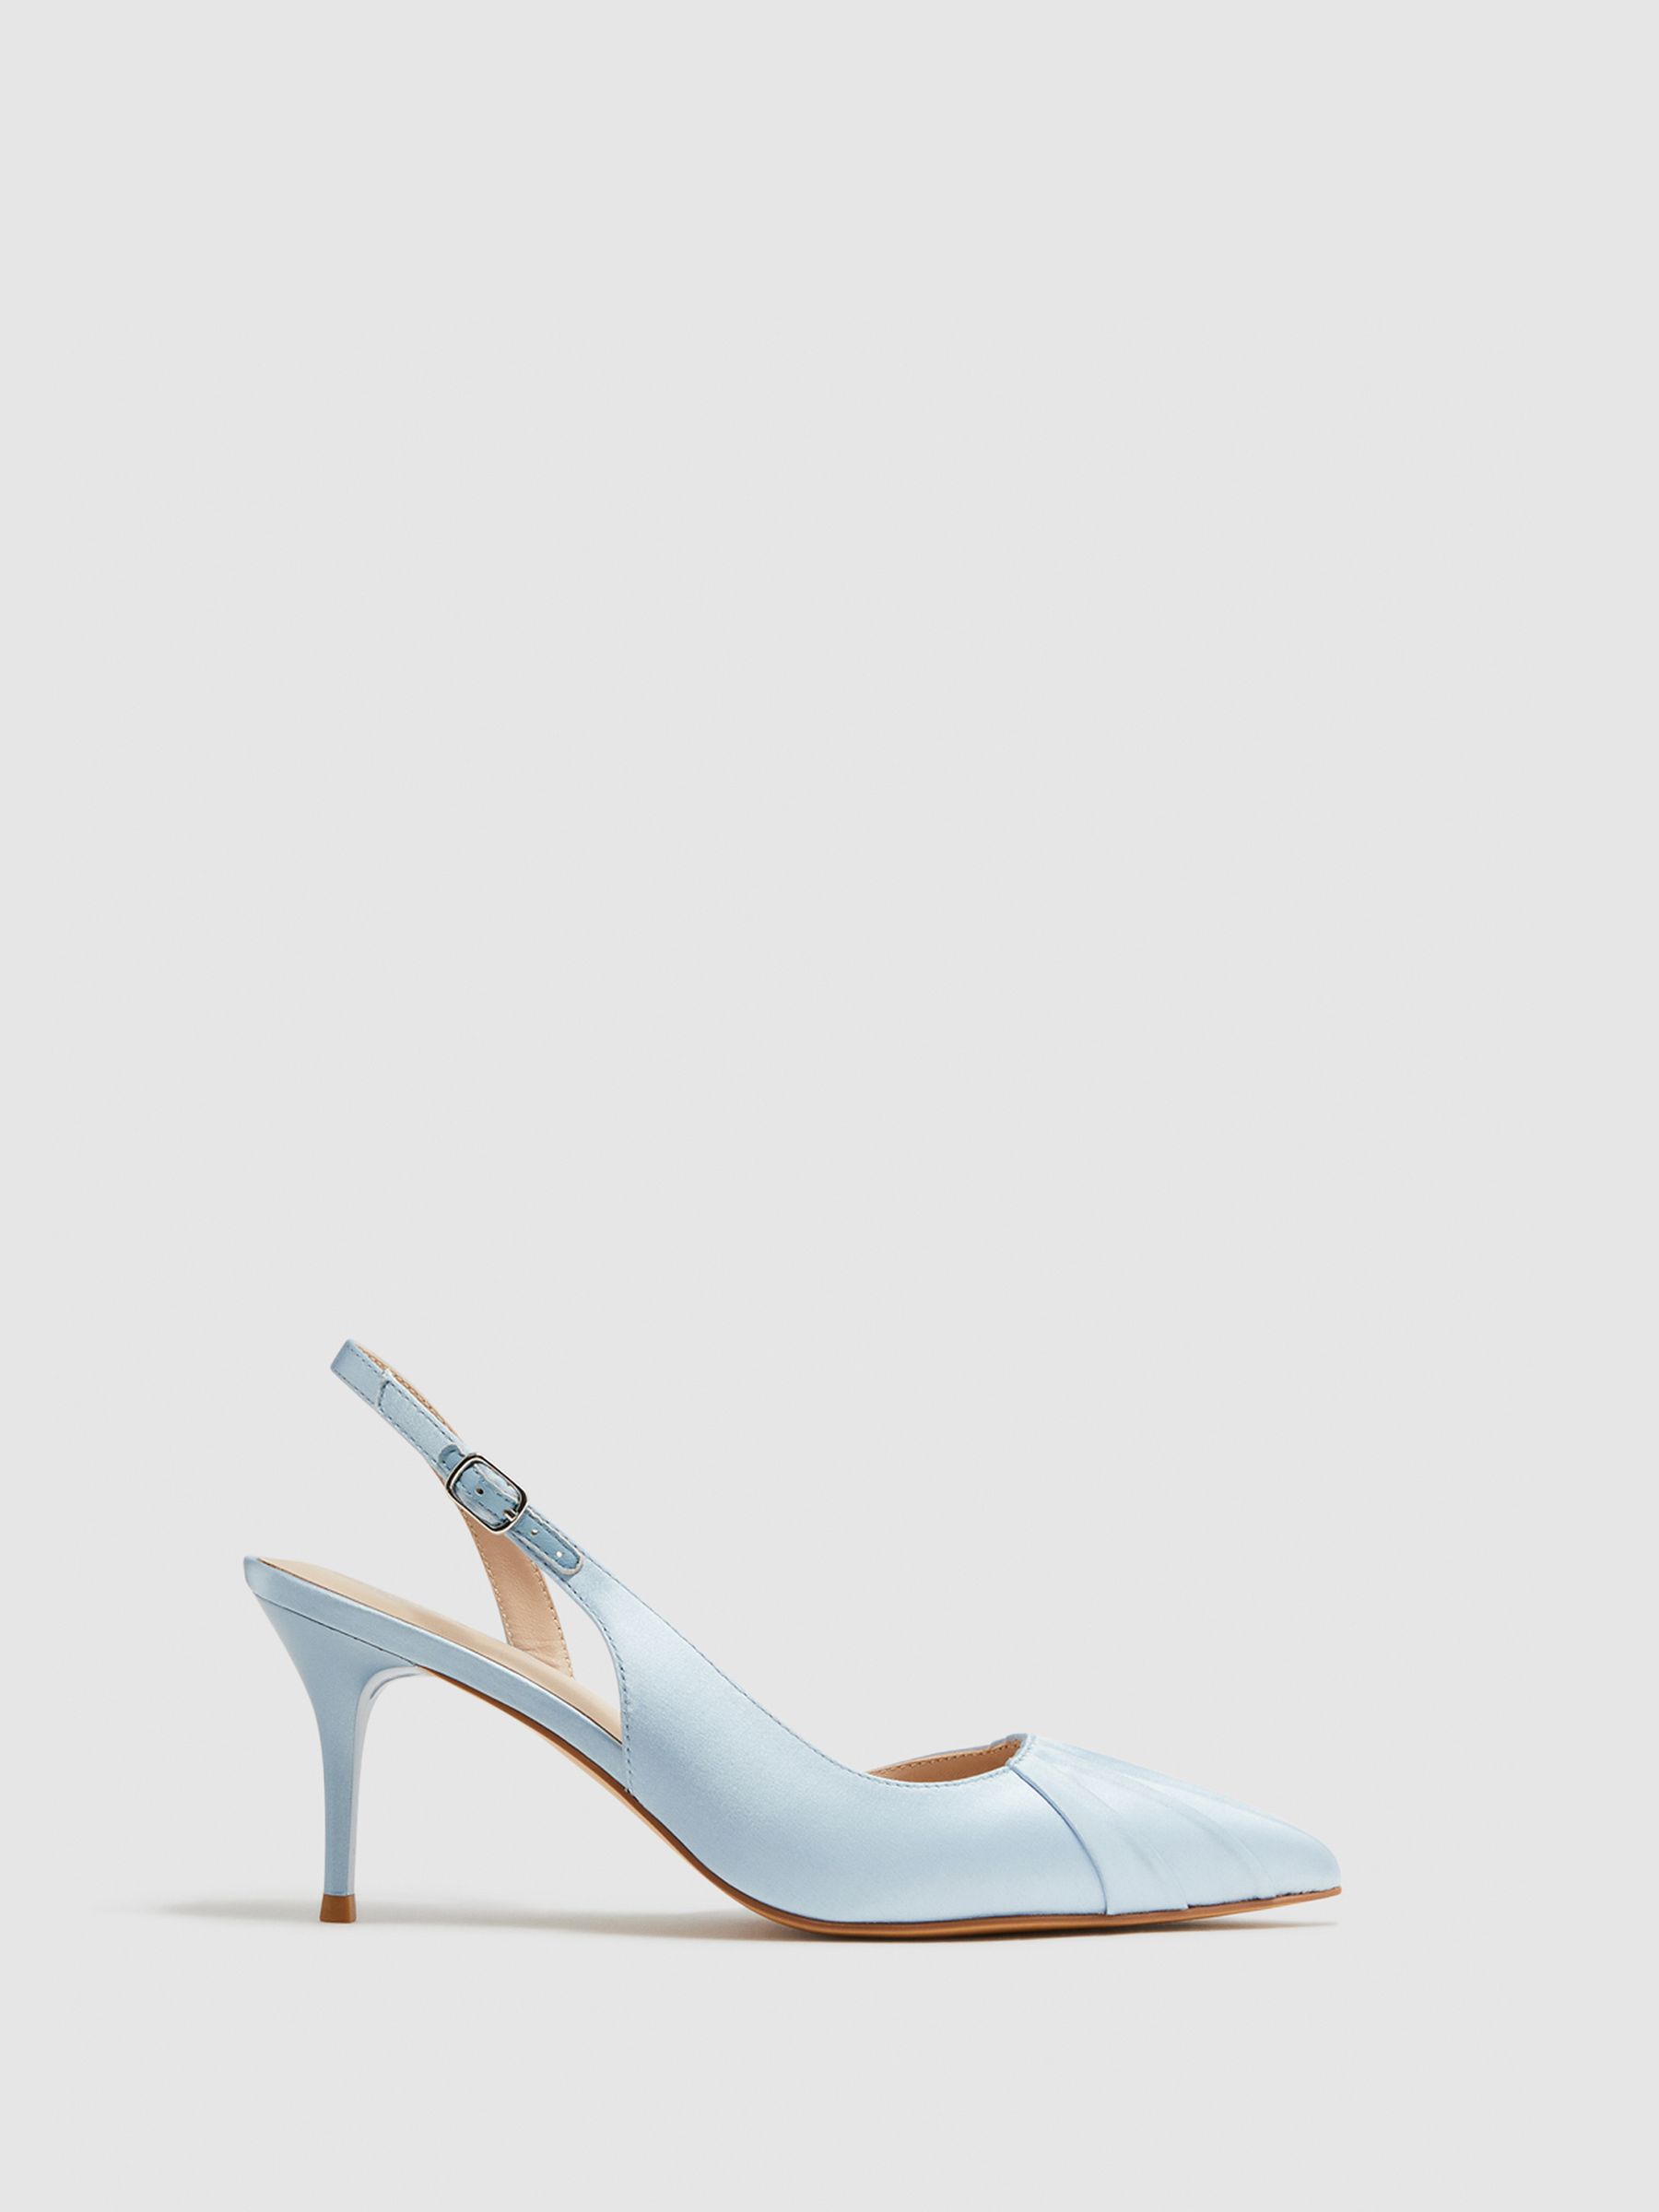 Reiss Cecily Pointed Court Shoes - REISS